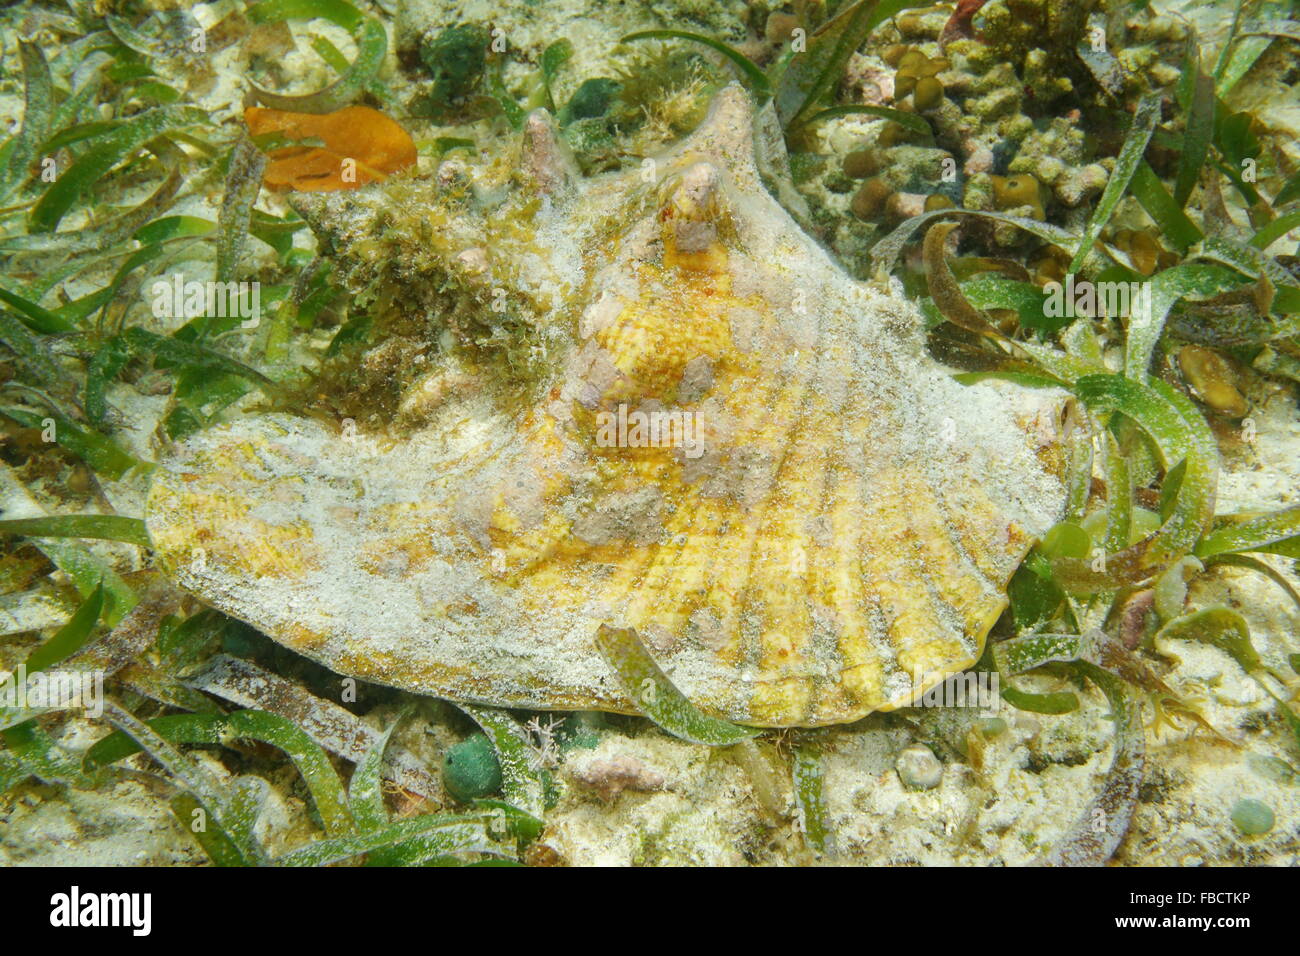 Queen conch shell, Lobatus gigas, underwater on seabed with seagrass, alive specimen, Caribbean sea Stock Photo